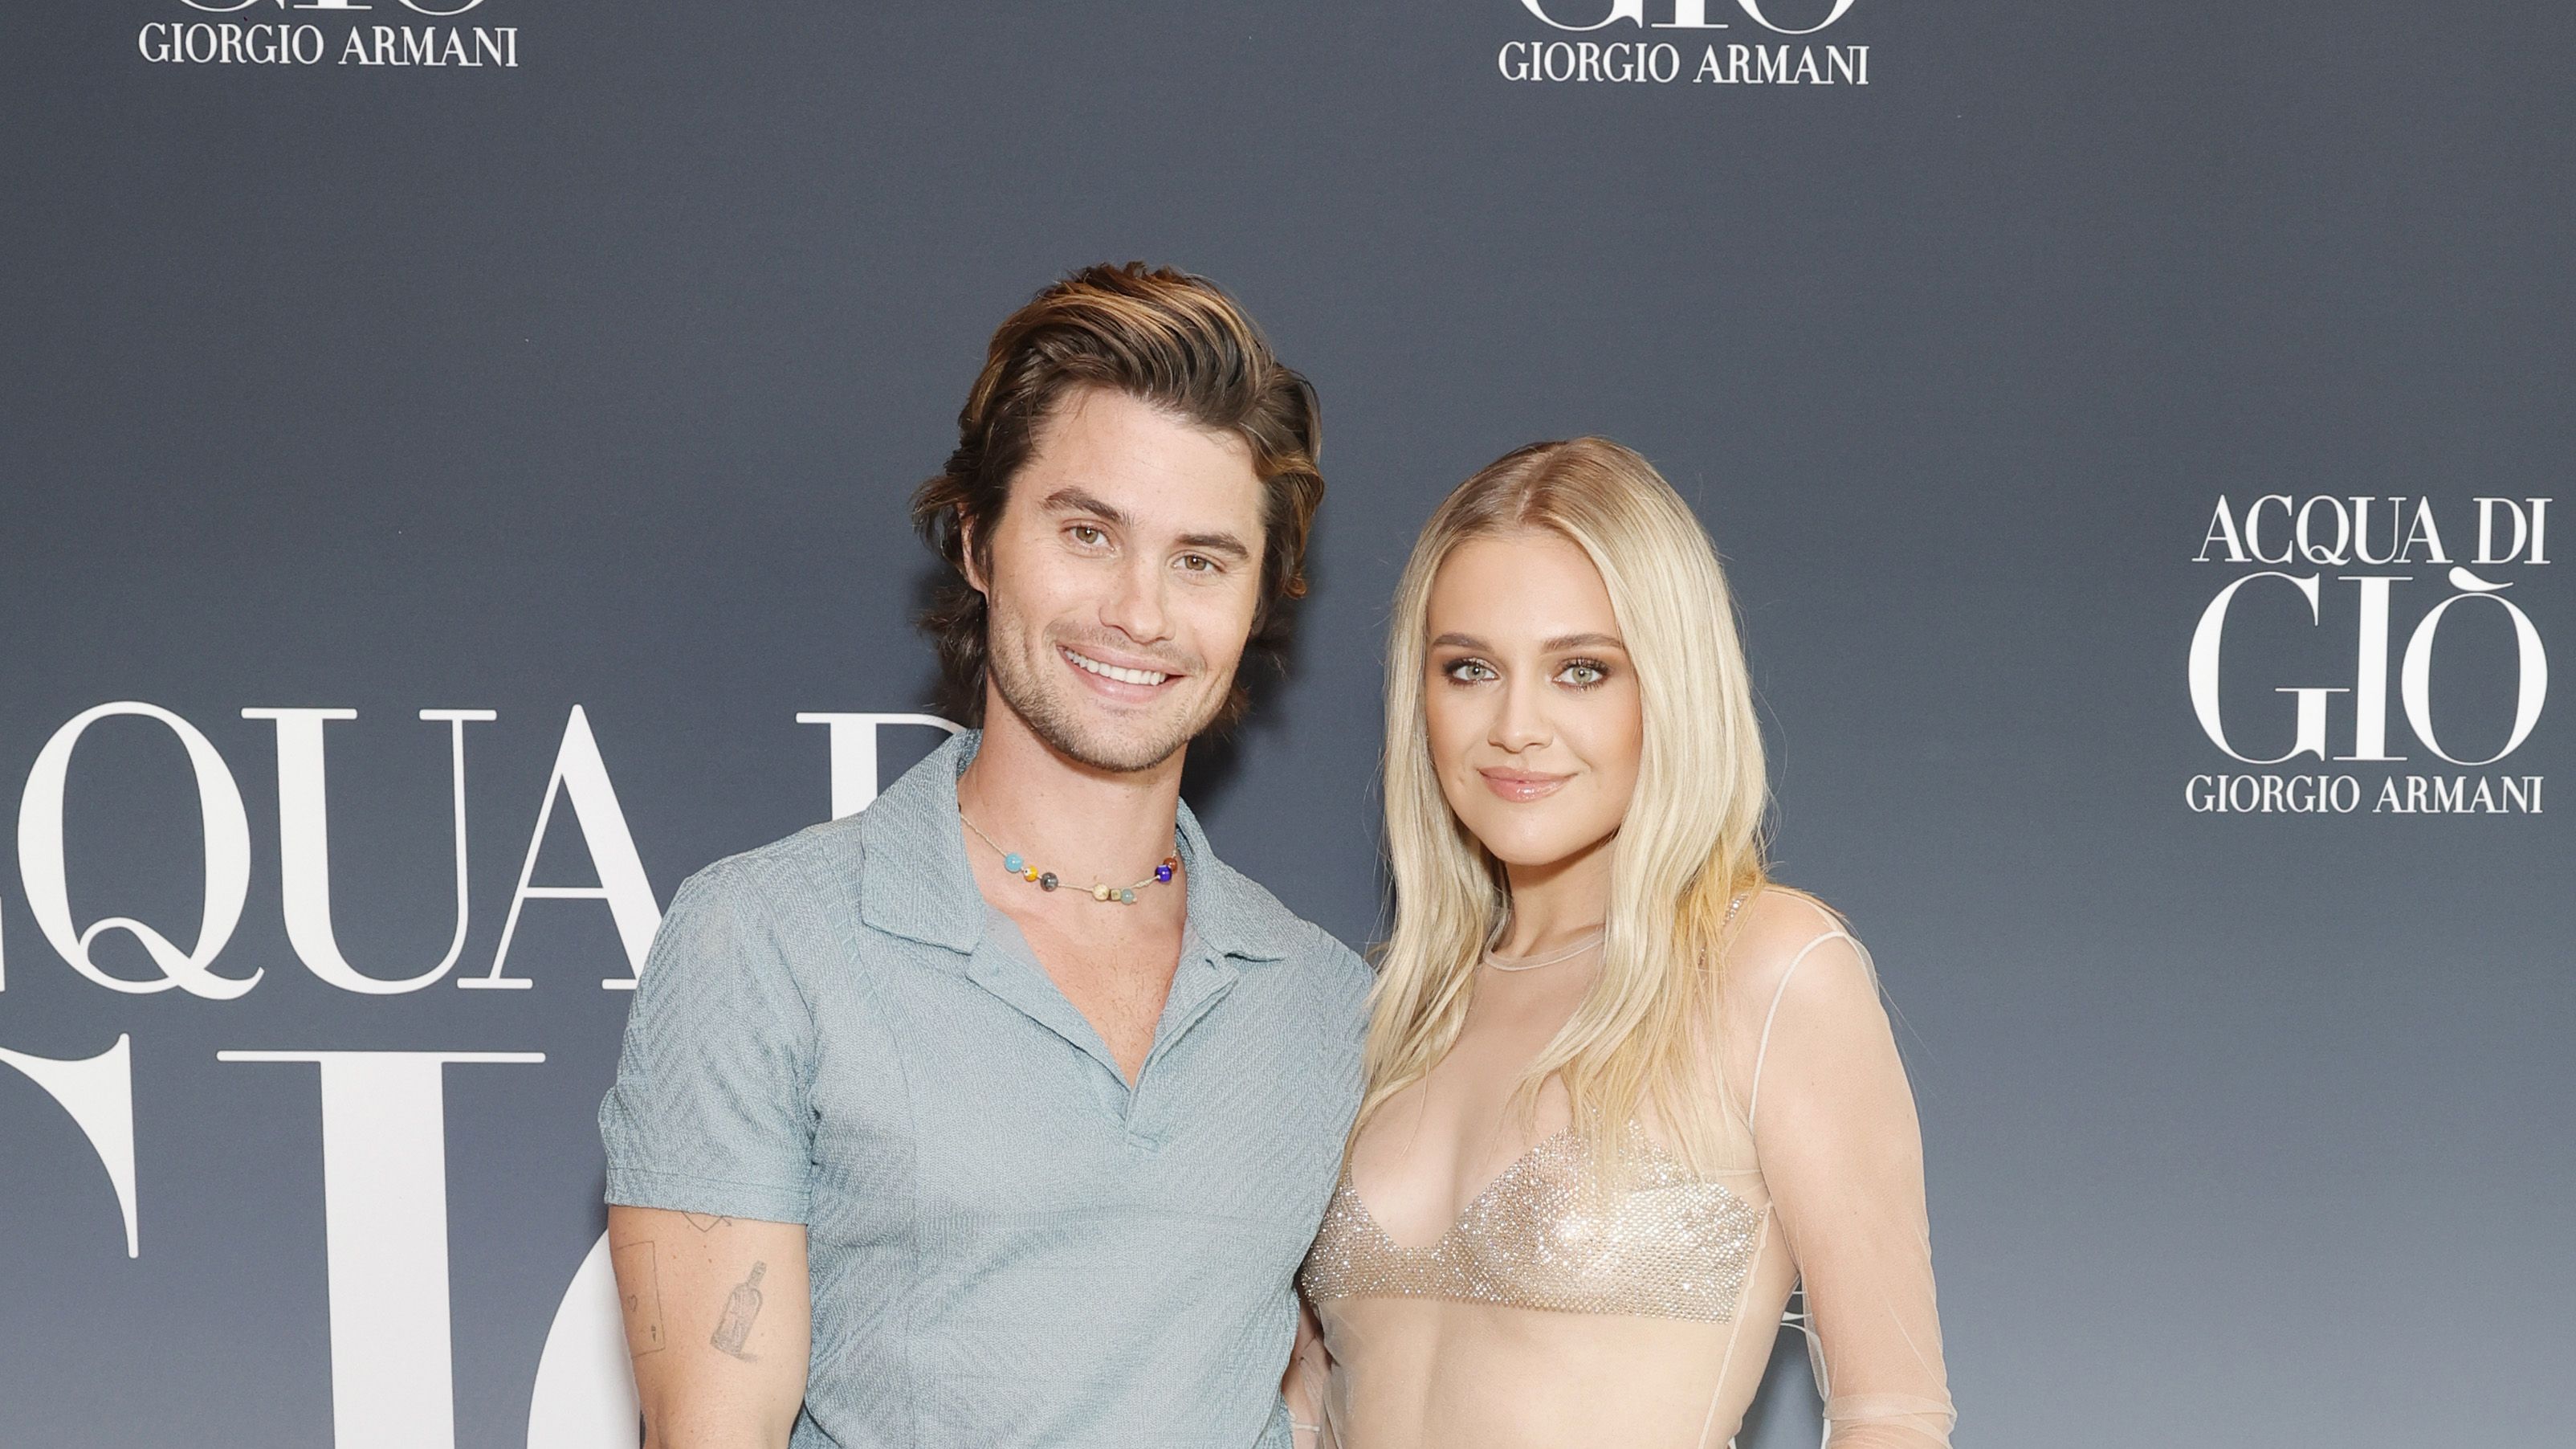 https://hips.hearstapps.com/hmg-prod/images/chase-stokes-and-kelsea-ballerini-attend-as-armani-beauty-news-photo-1689704655.jpg?crop=1xw:0.37492xh;center,top